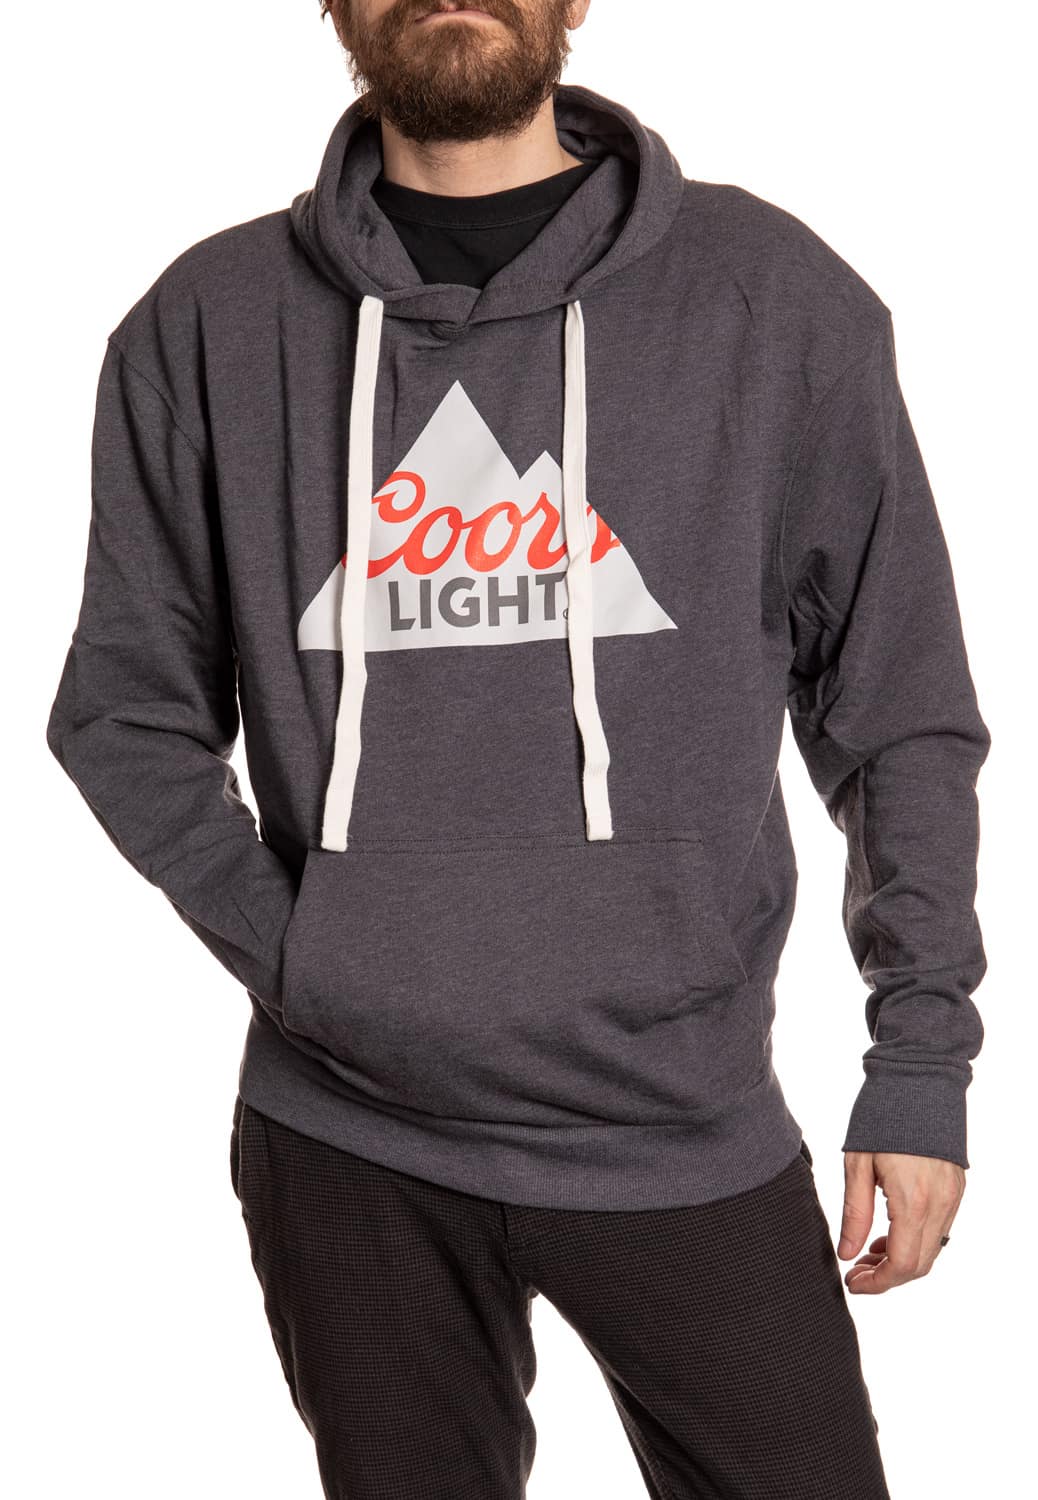 Coors Light Classic Logo Hoodie in Grey, Front View.